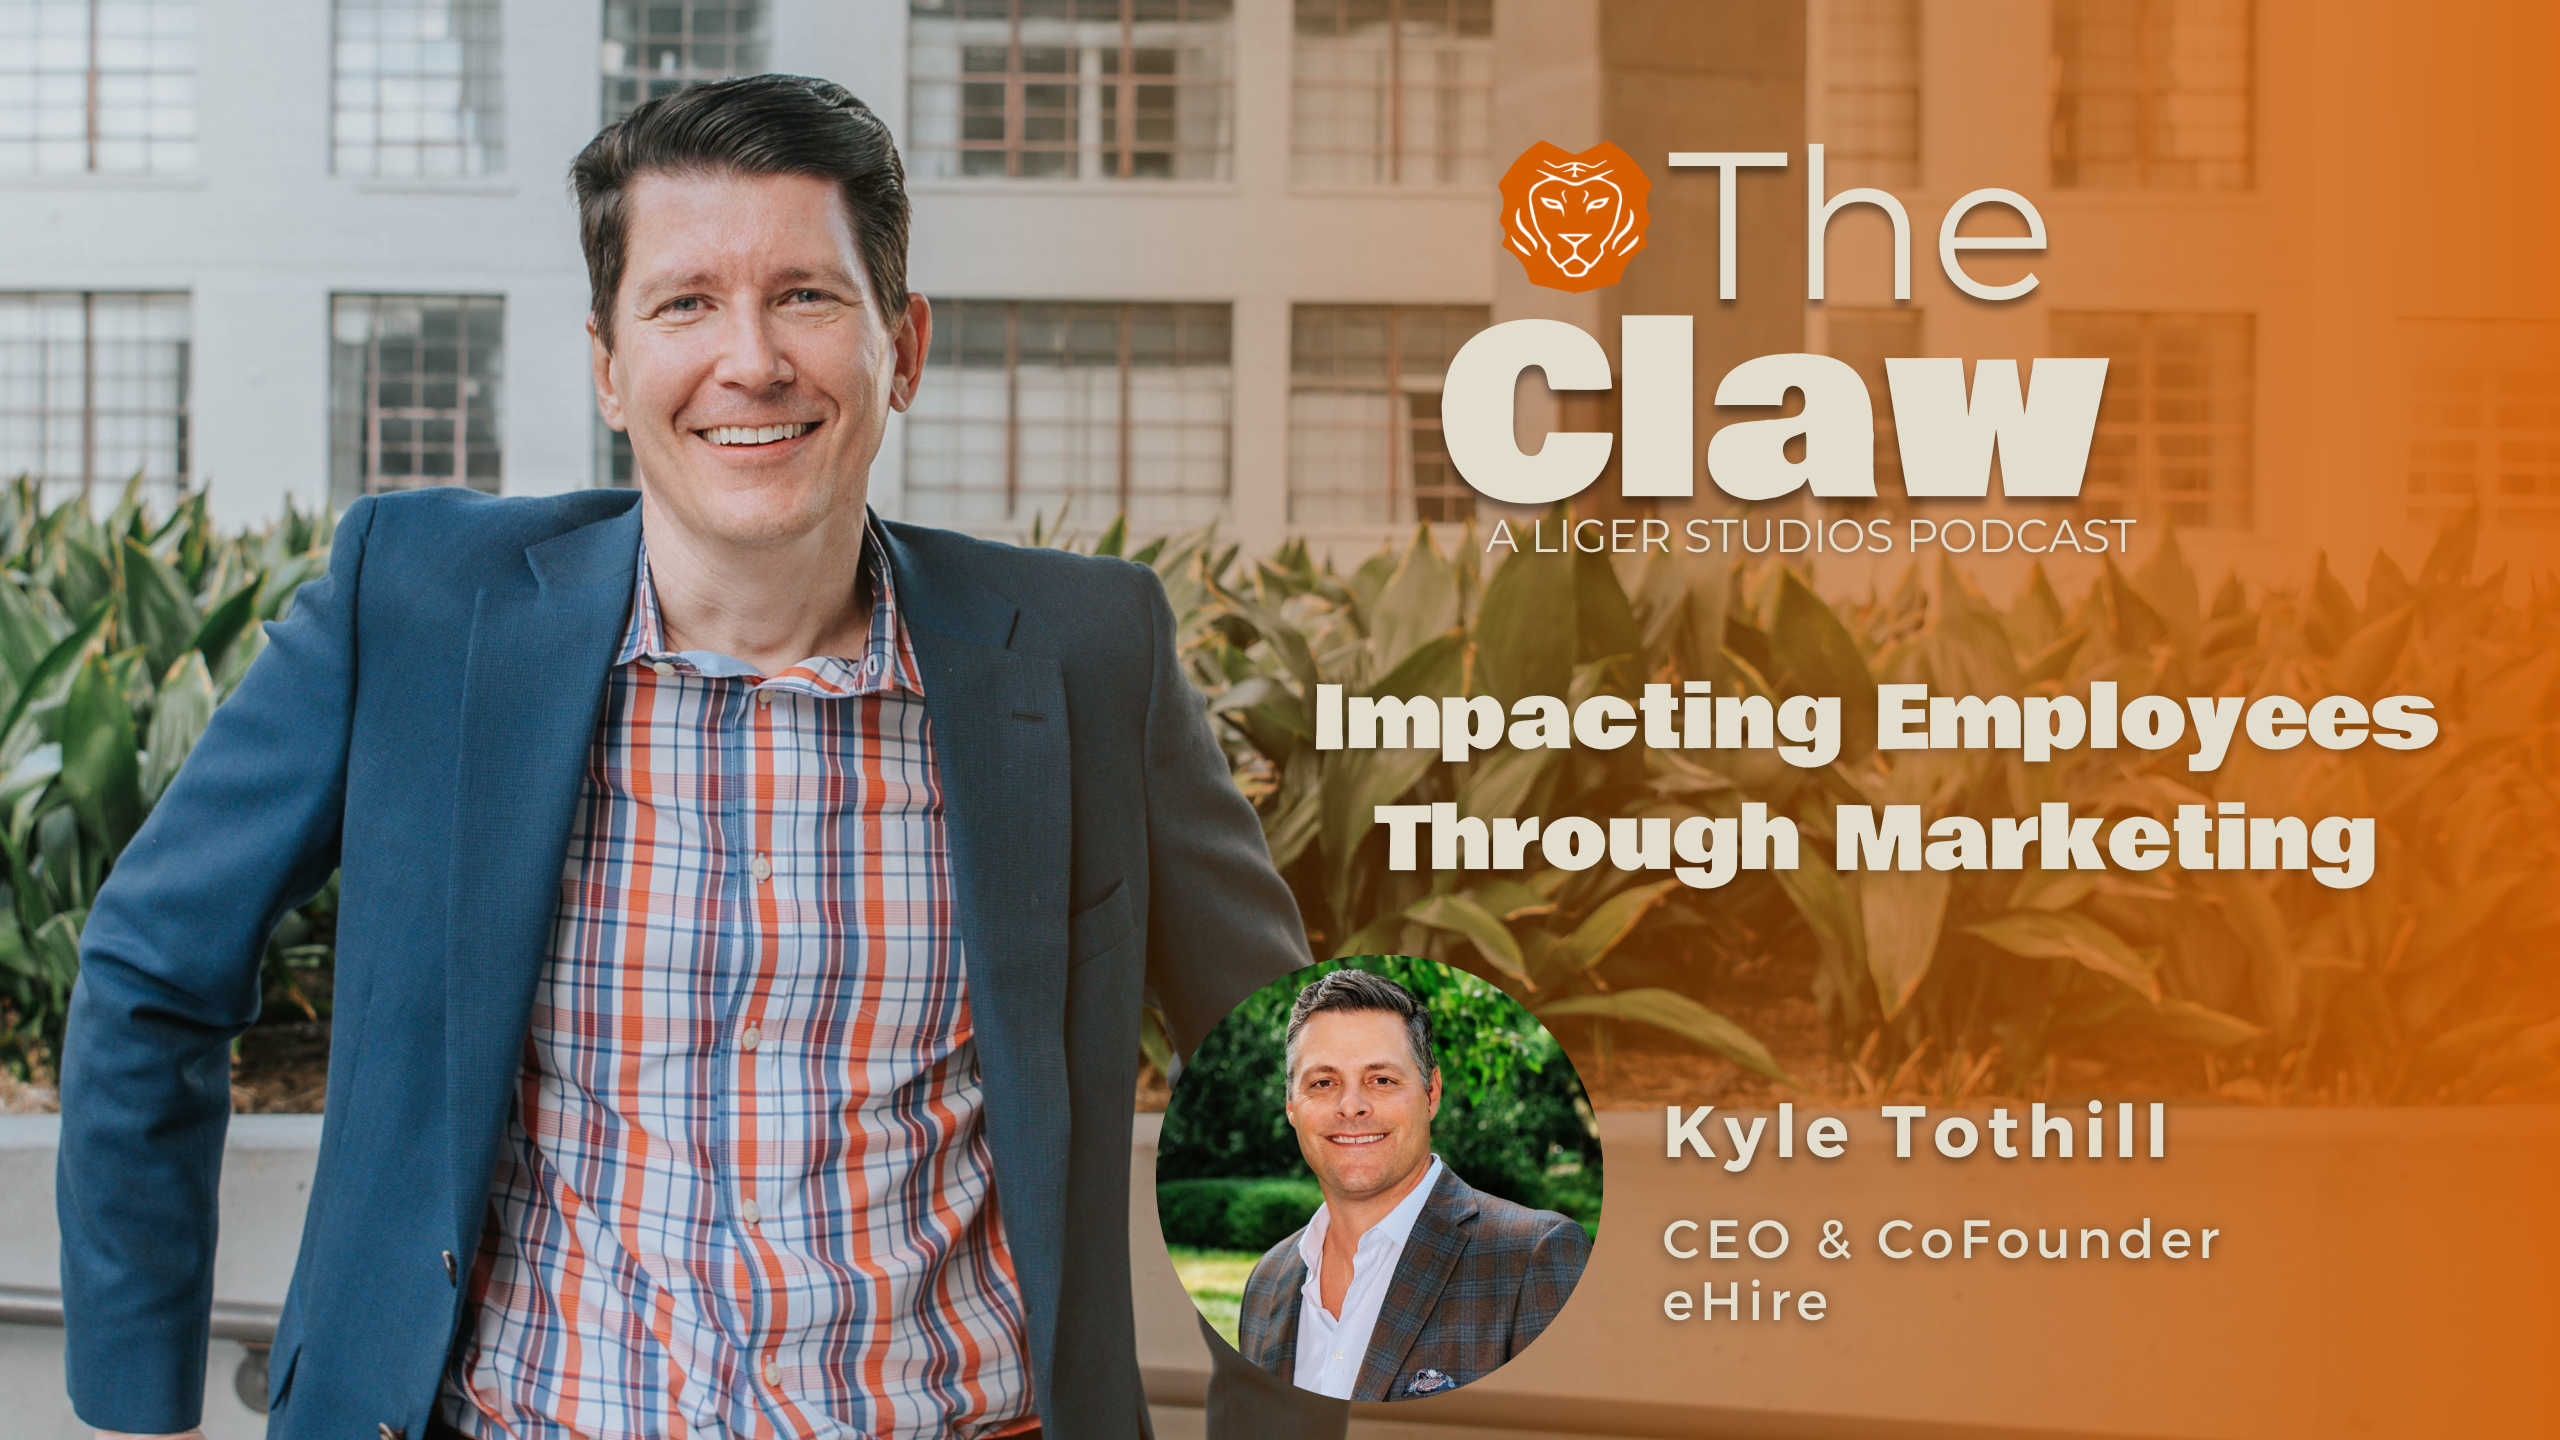 The Claw Podcast: Impacting Employees Through Marketing with Kyle Tothill